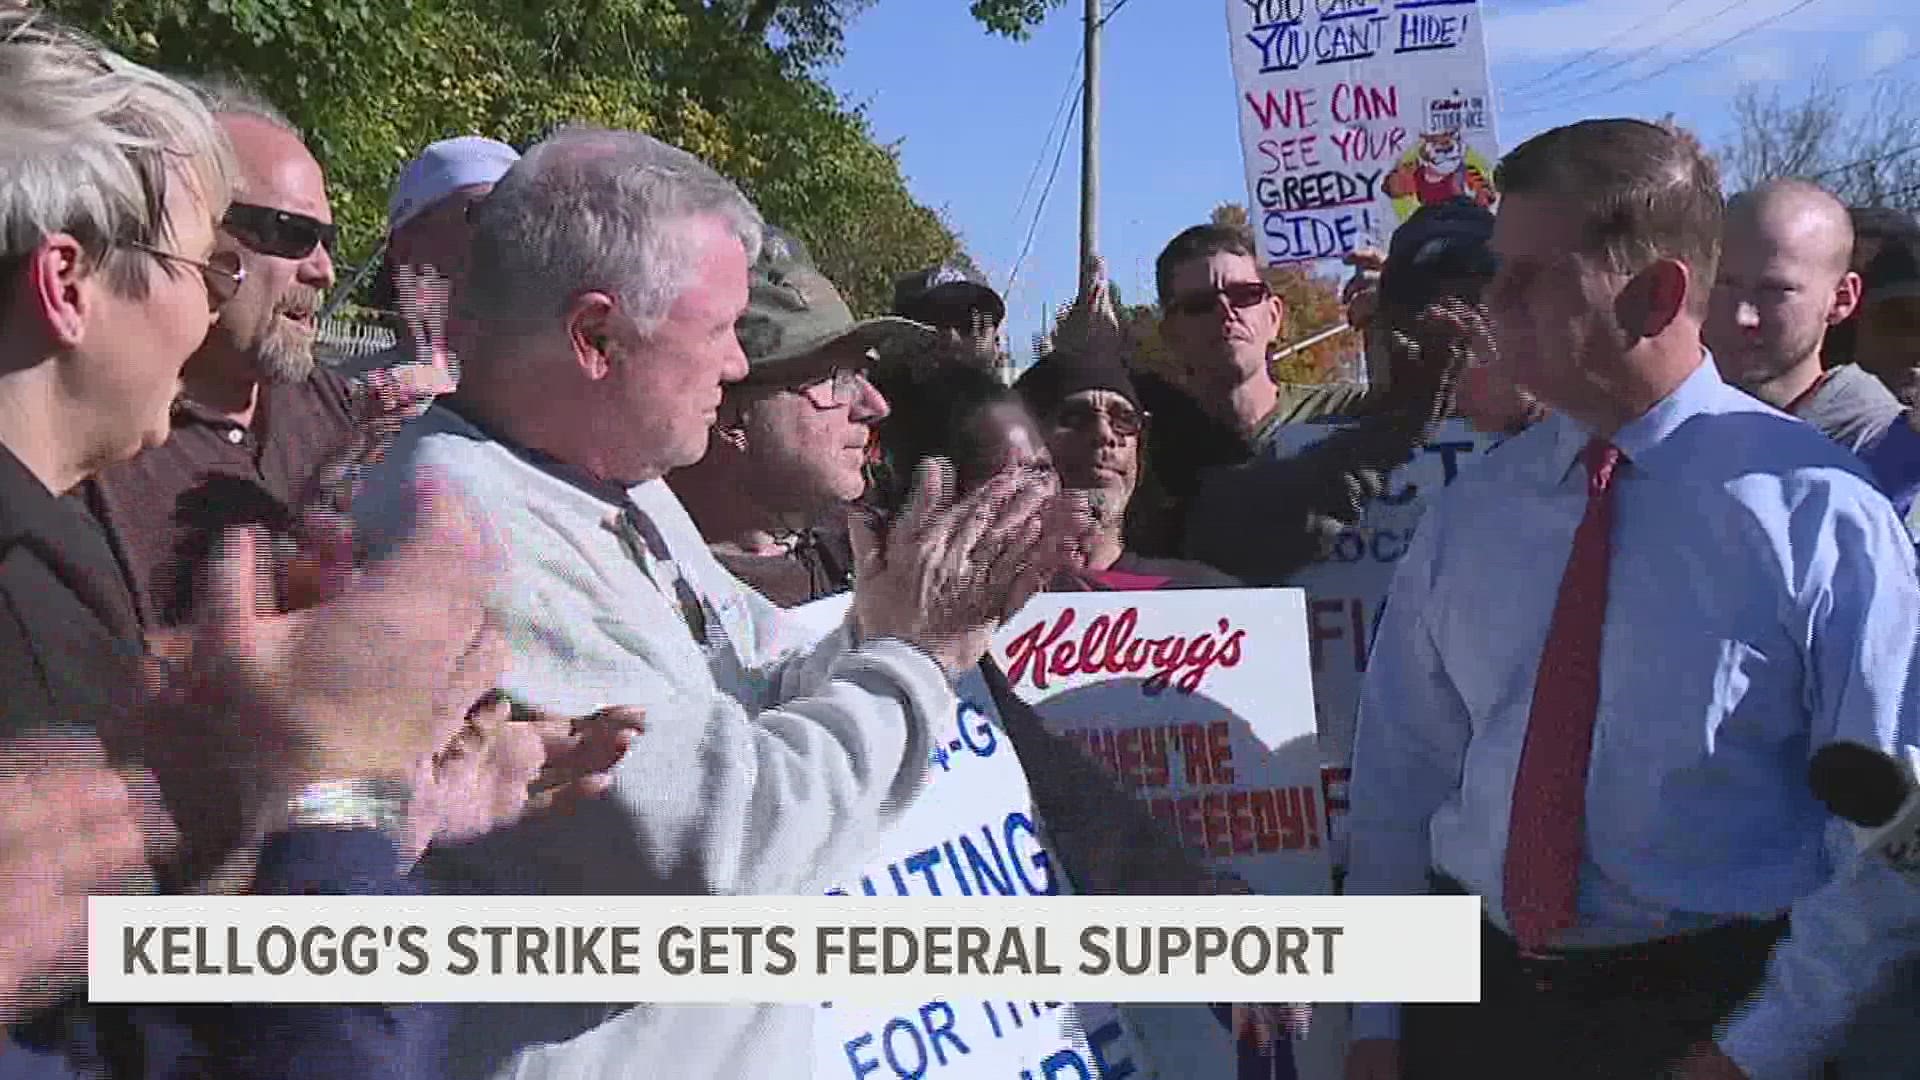 An ongoing Kellogg's worker strike drew national attention when a member of President Joe Biden’s Cabinet visited workers outside the Lancaster plant.